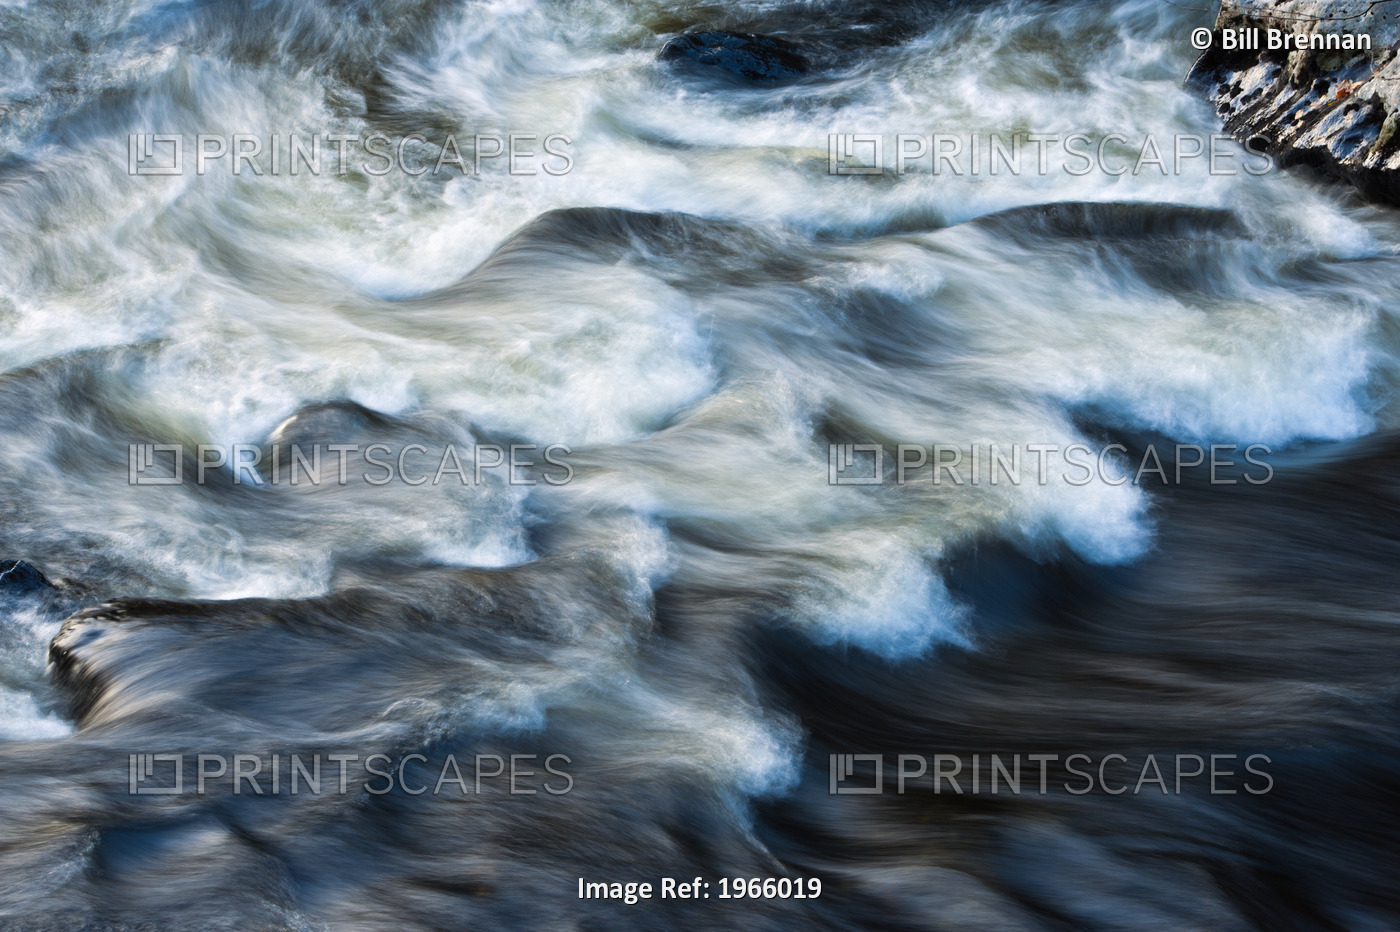 Vermont, Jamaica State Park, West River, Abstract View Of Flowing Water.